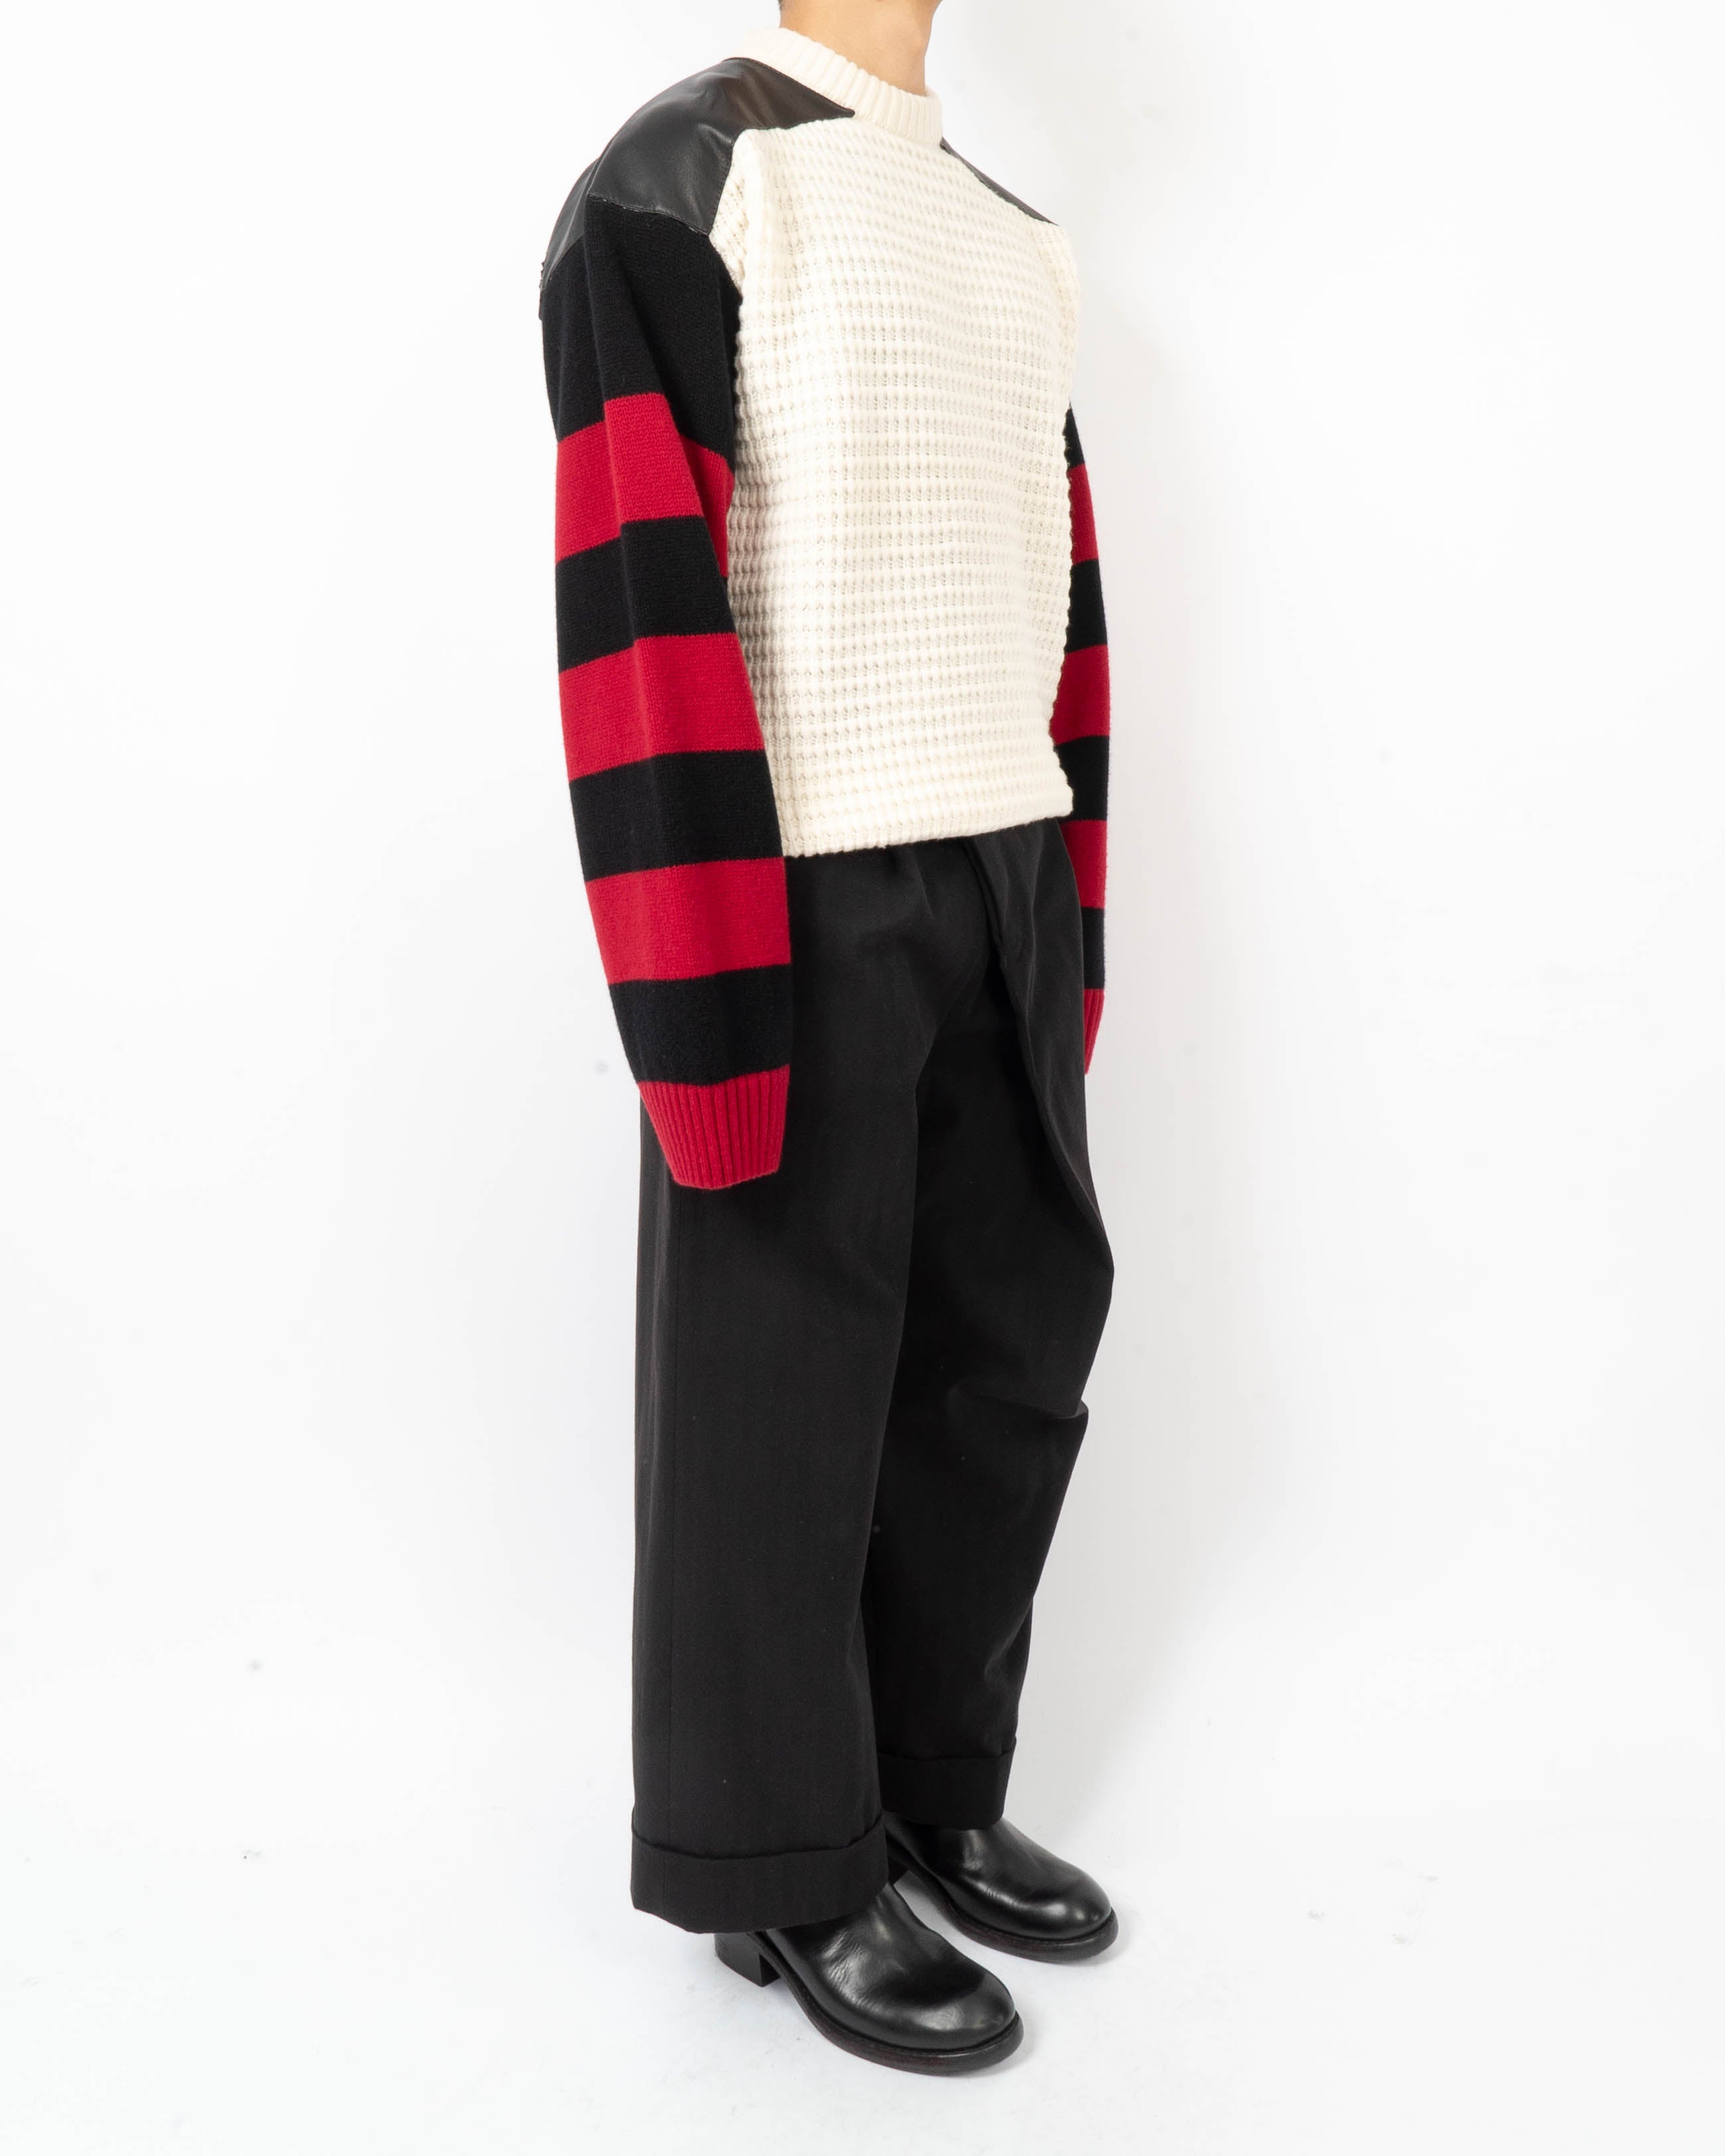 FW19 Knit & Leather Striped Sweater